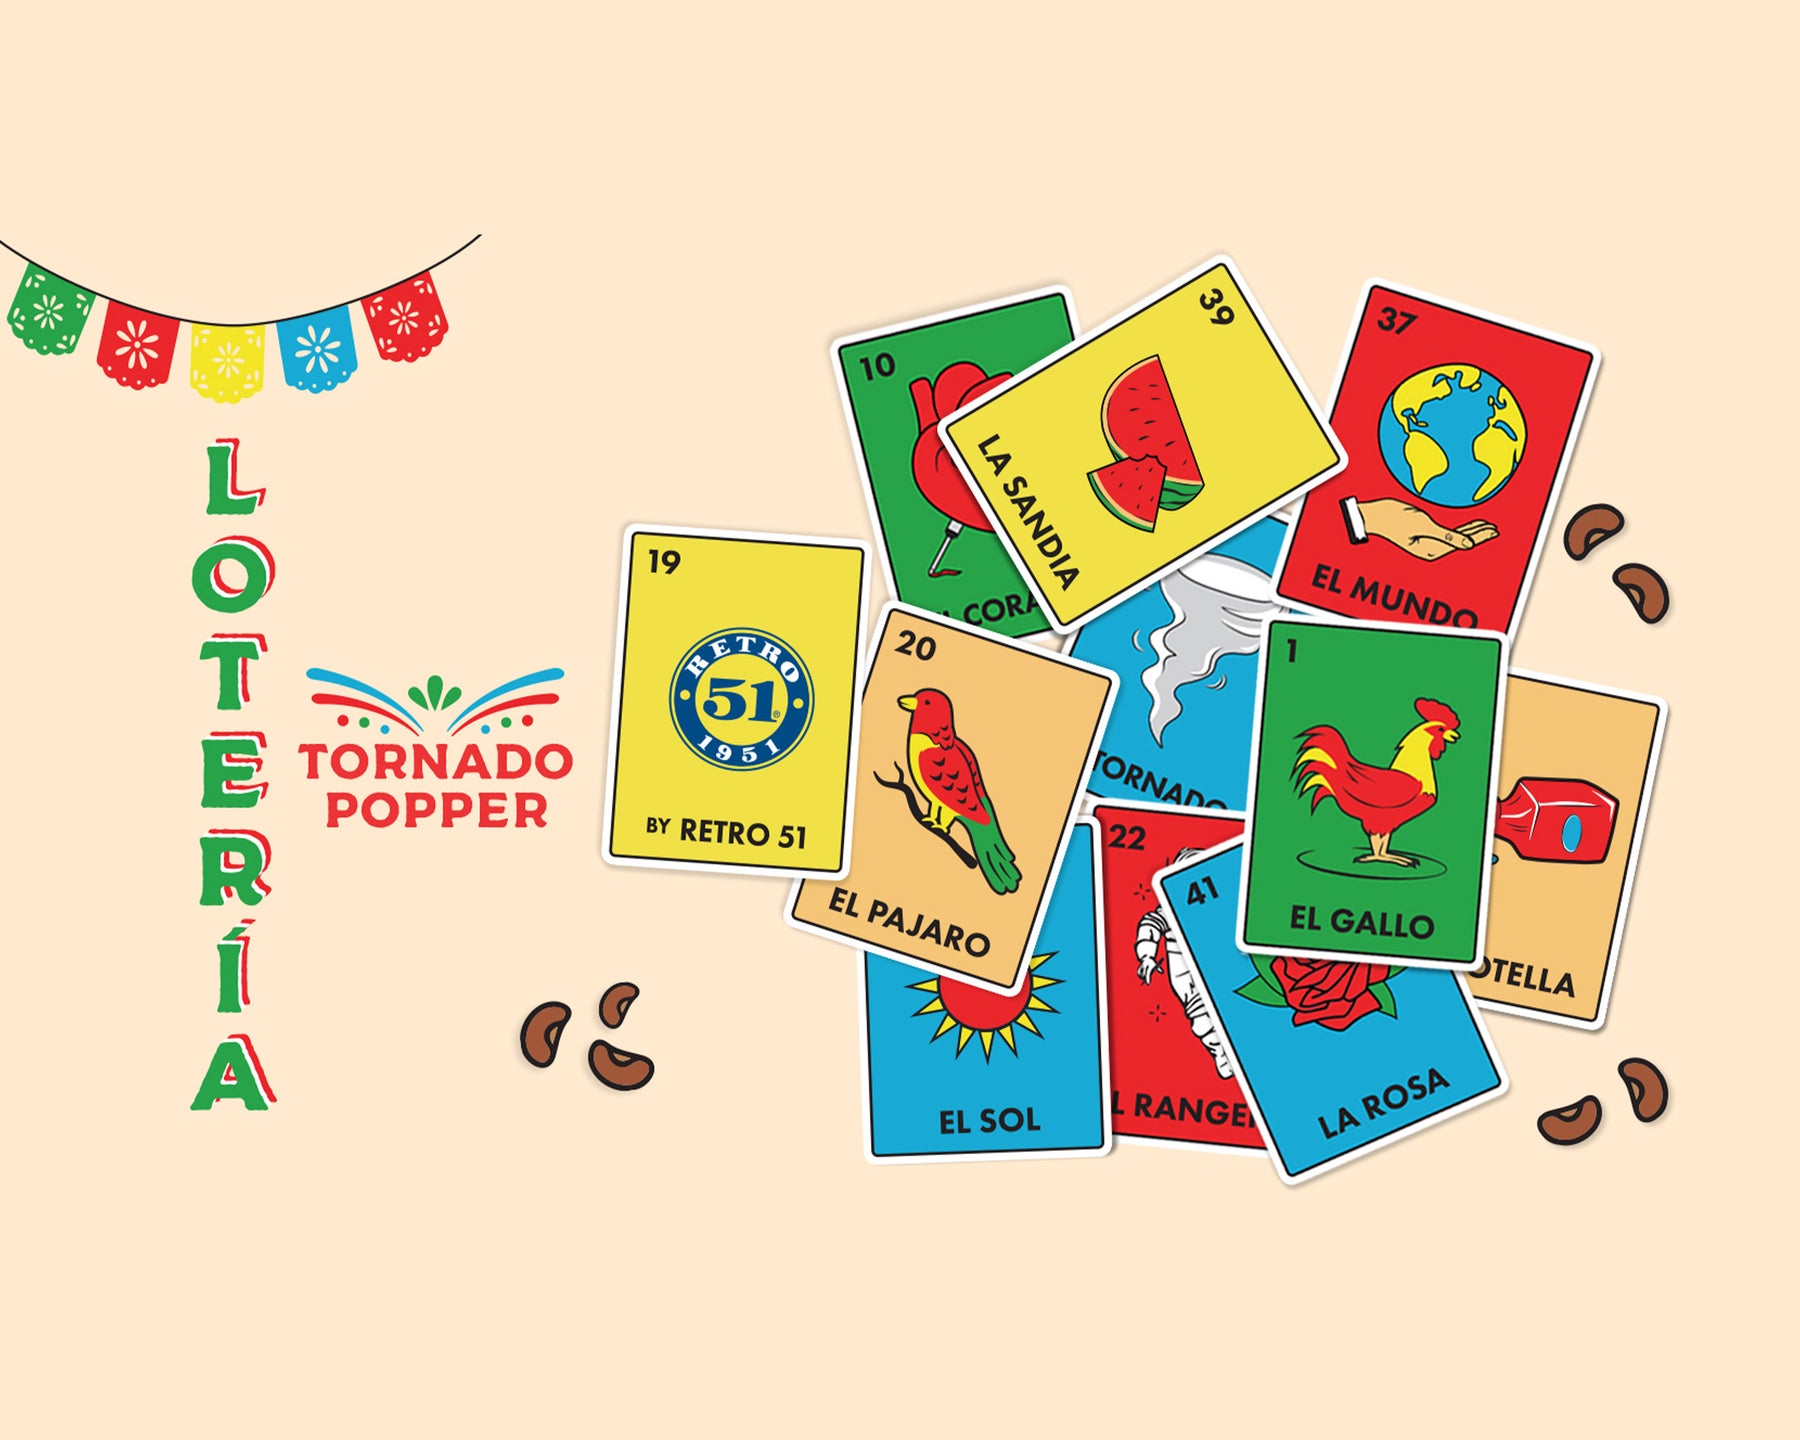 Celebrating One Year of the Lotería Tornado™ Popper Rollerball Pen